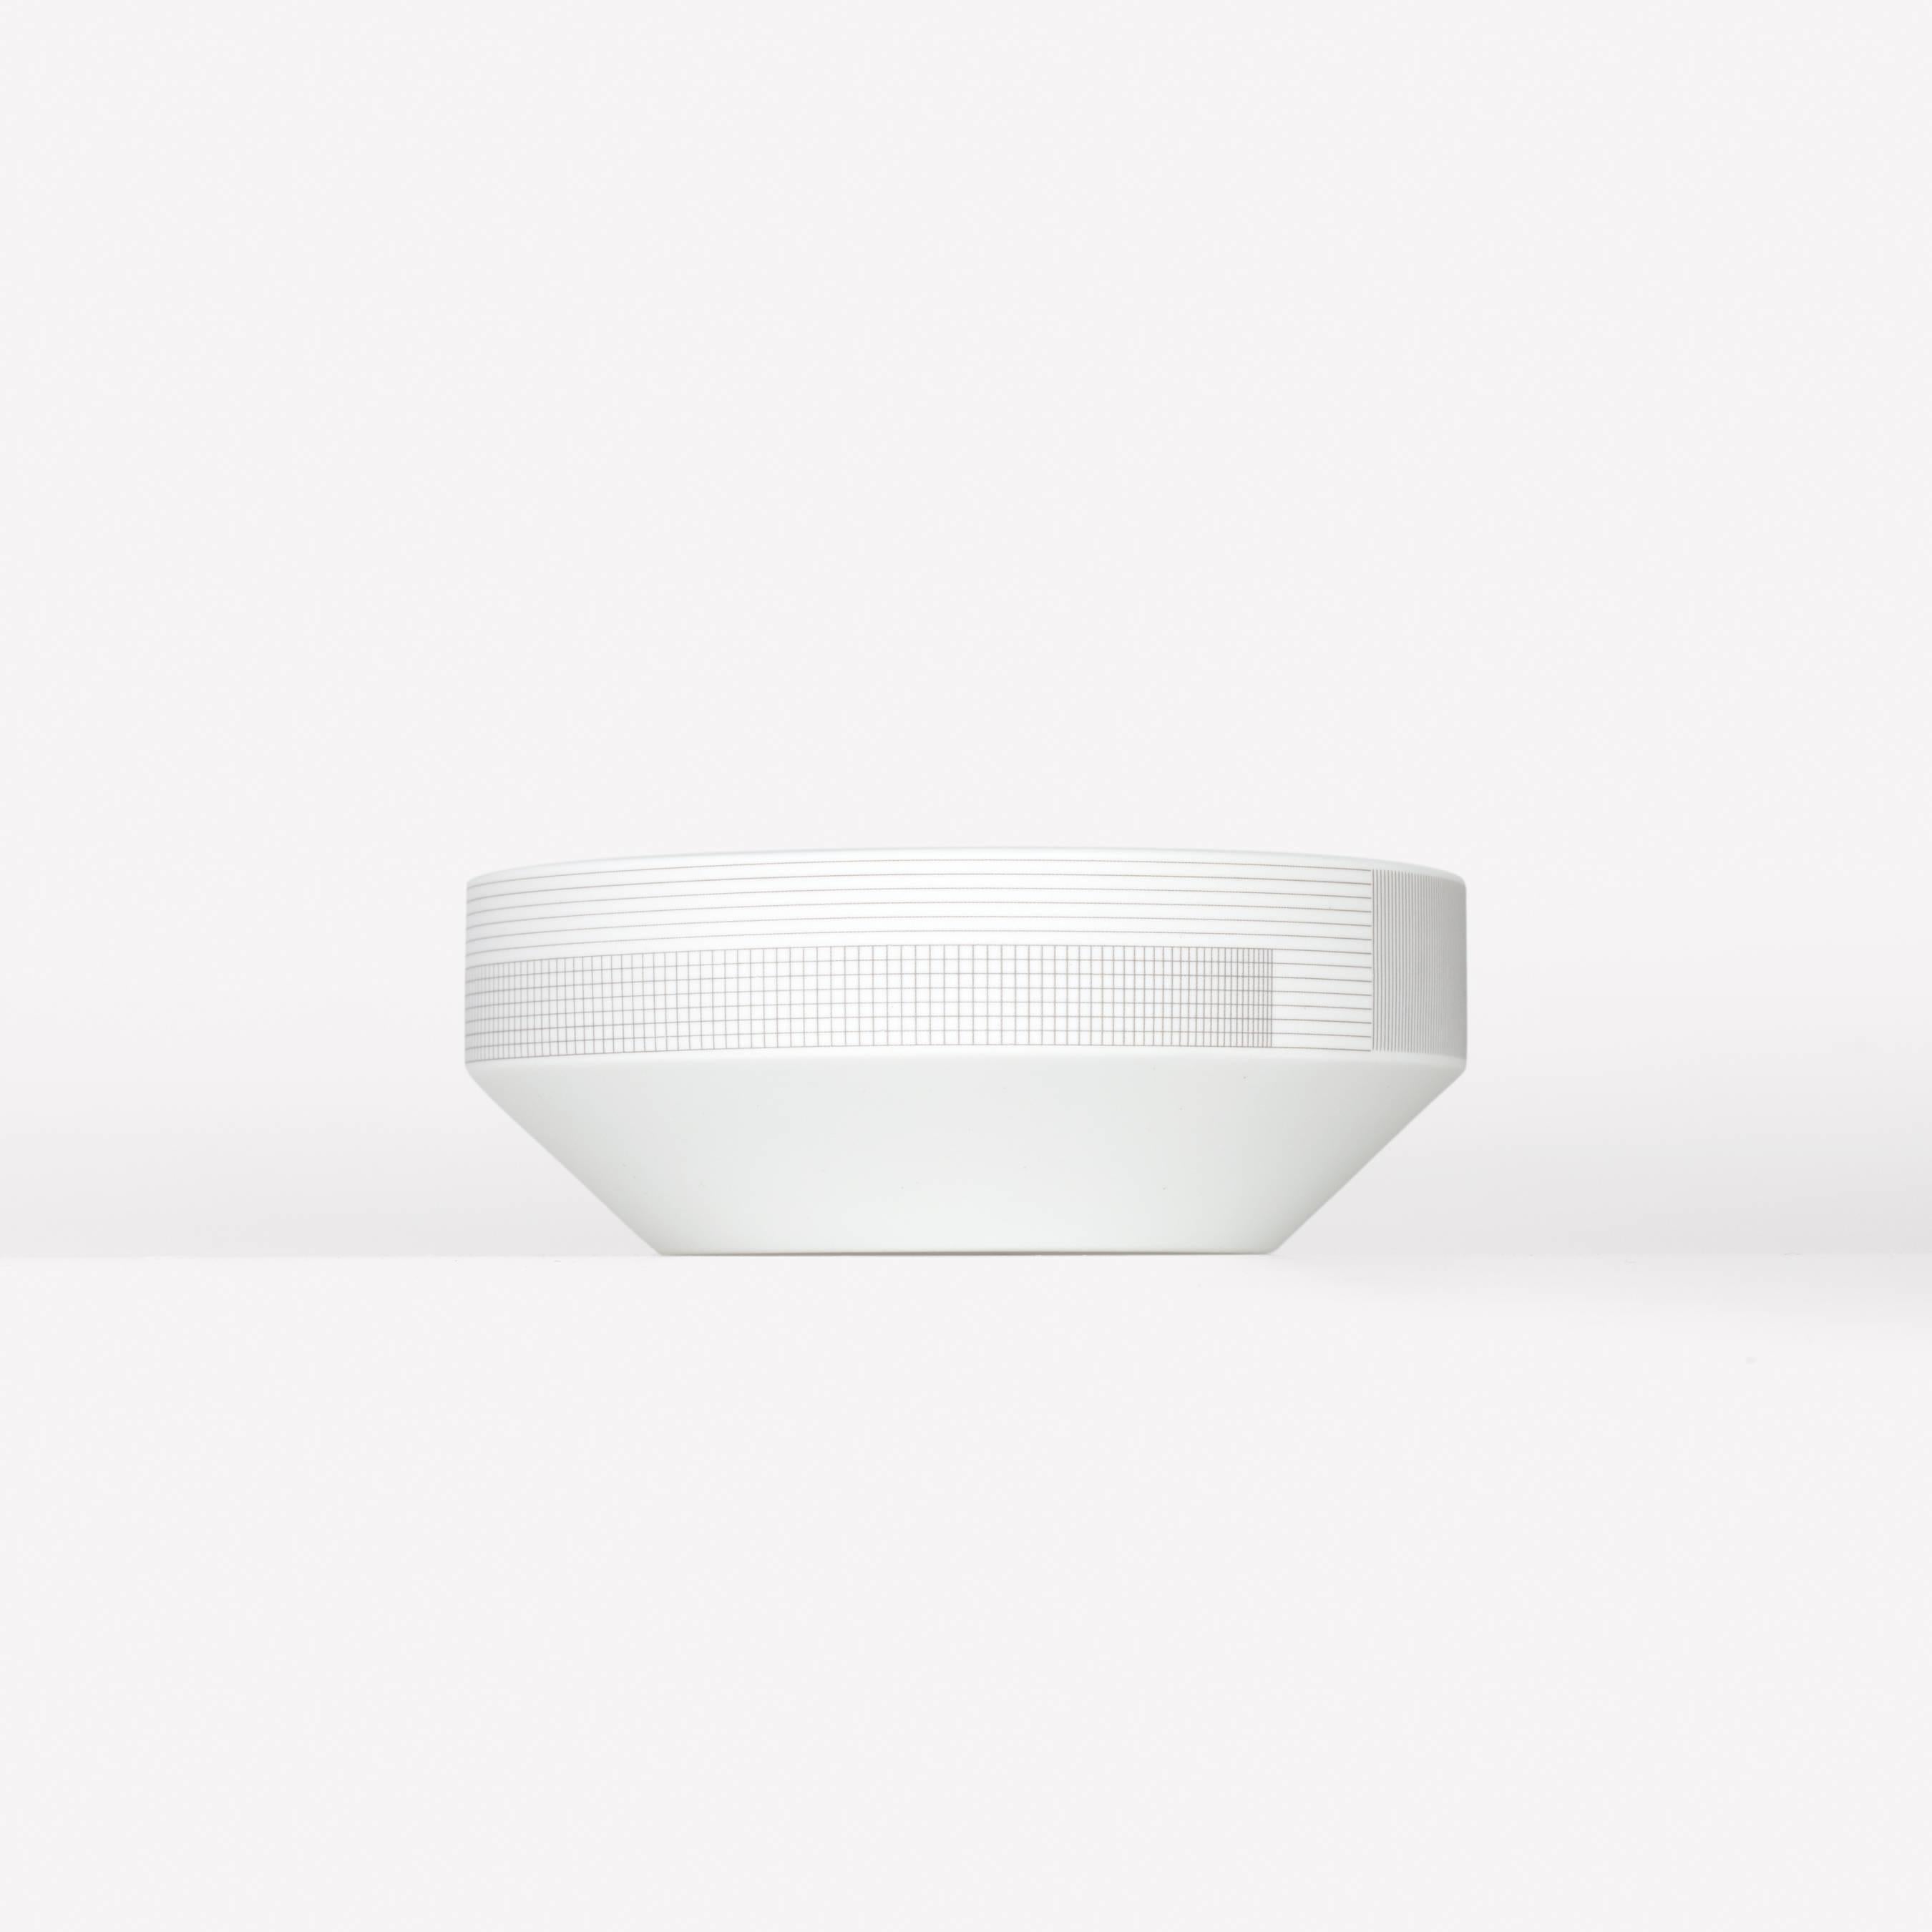 Pattern Porcelain Bowl by Scholten & Baijings
003 Zinc

Porcelain with Grid textile graphic. Matte exterior with gloss interior. Made in Japan by 1616 / arita japan. 

Dishwasher safe.

Scholten & Baijings for Maharam is a collection of home goods